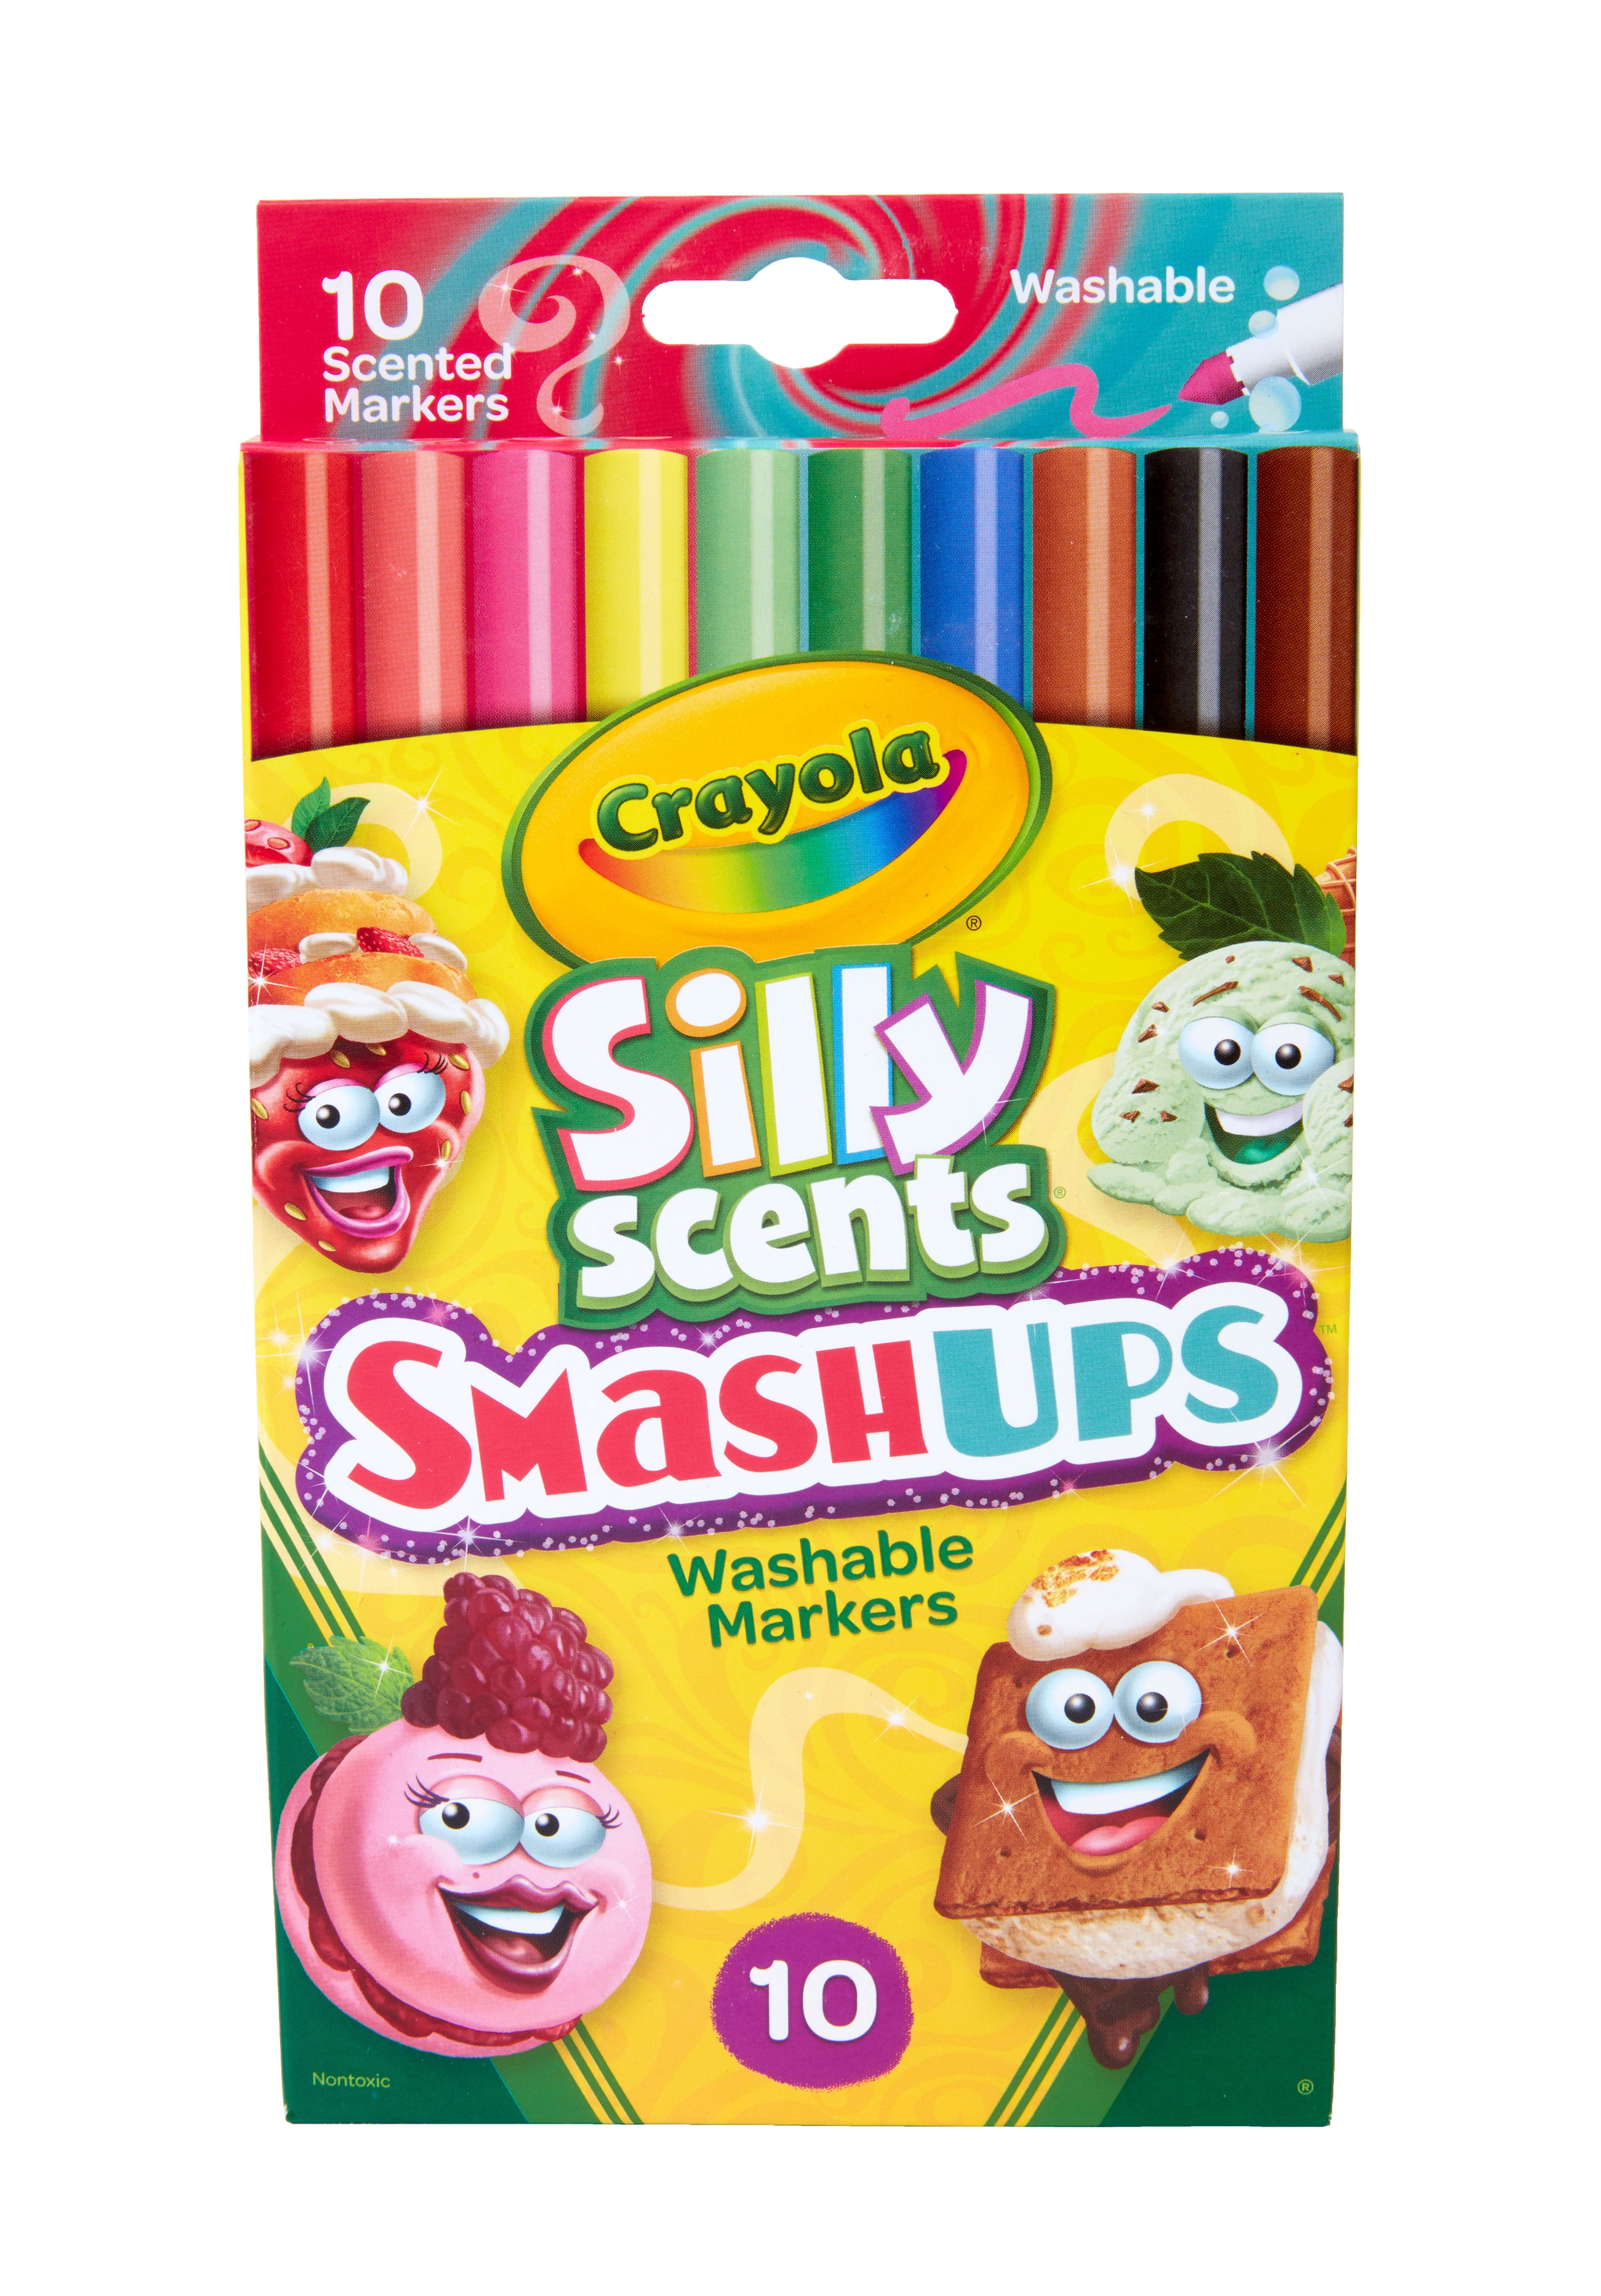 Crayola Silly Scents Fine Line Markers, Smash Ups Scented Markers, School  Supplies, 10 Count